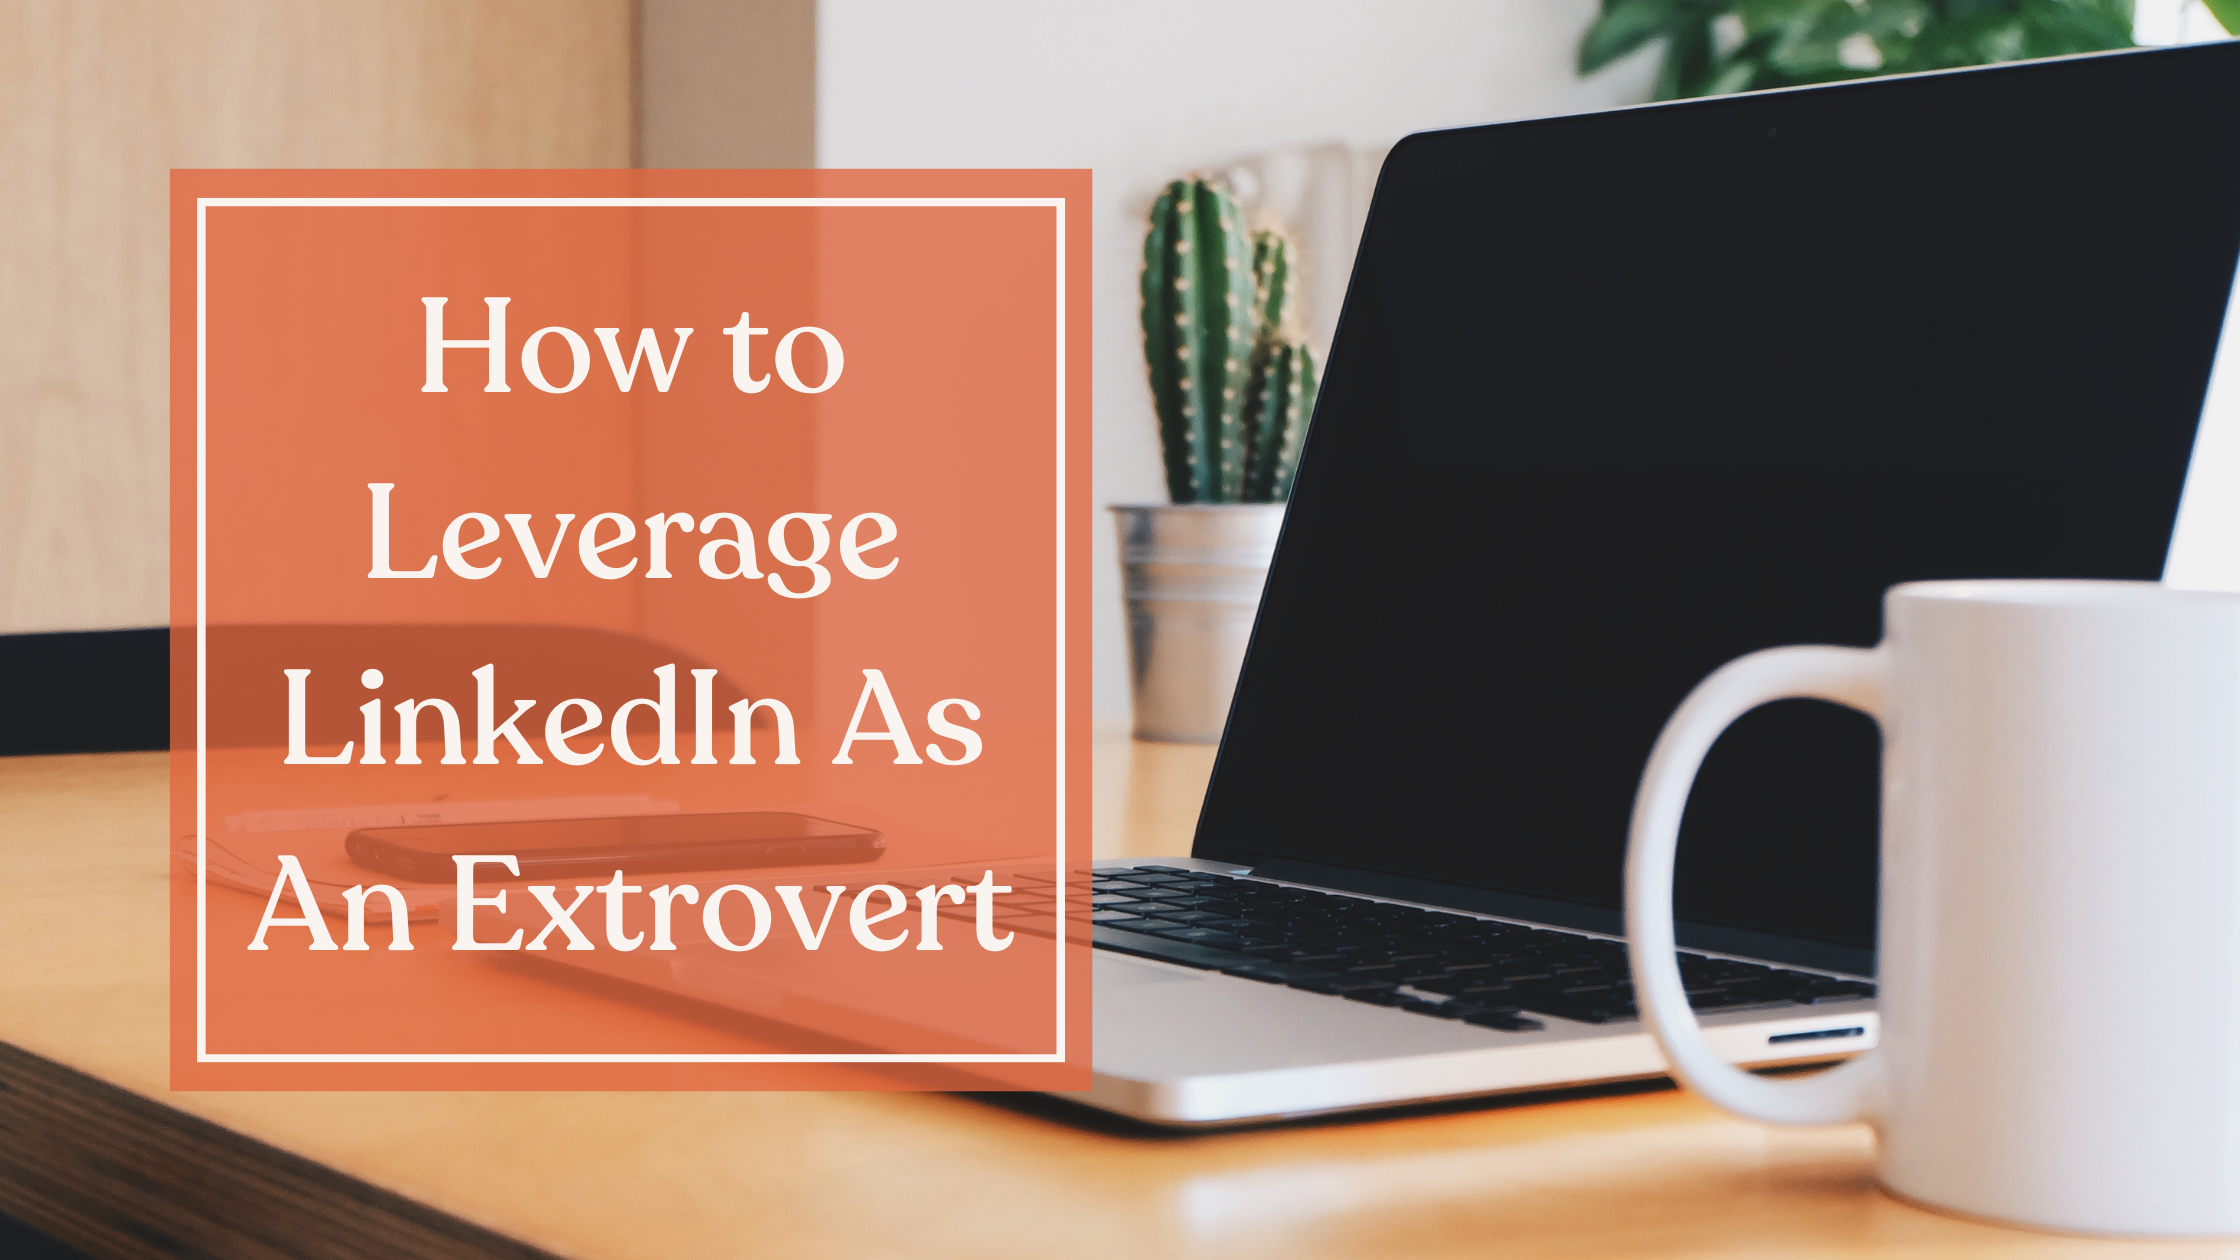 How to Leverage LinkedIn As An Extrovert